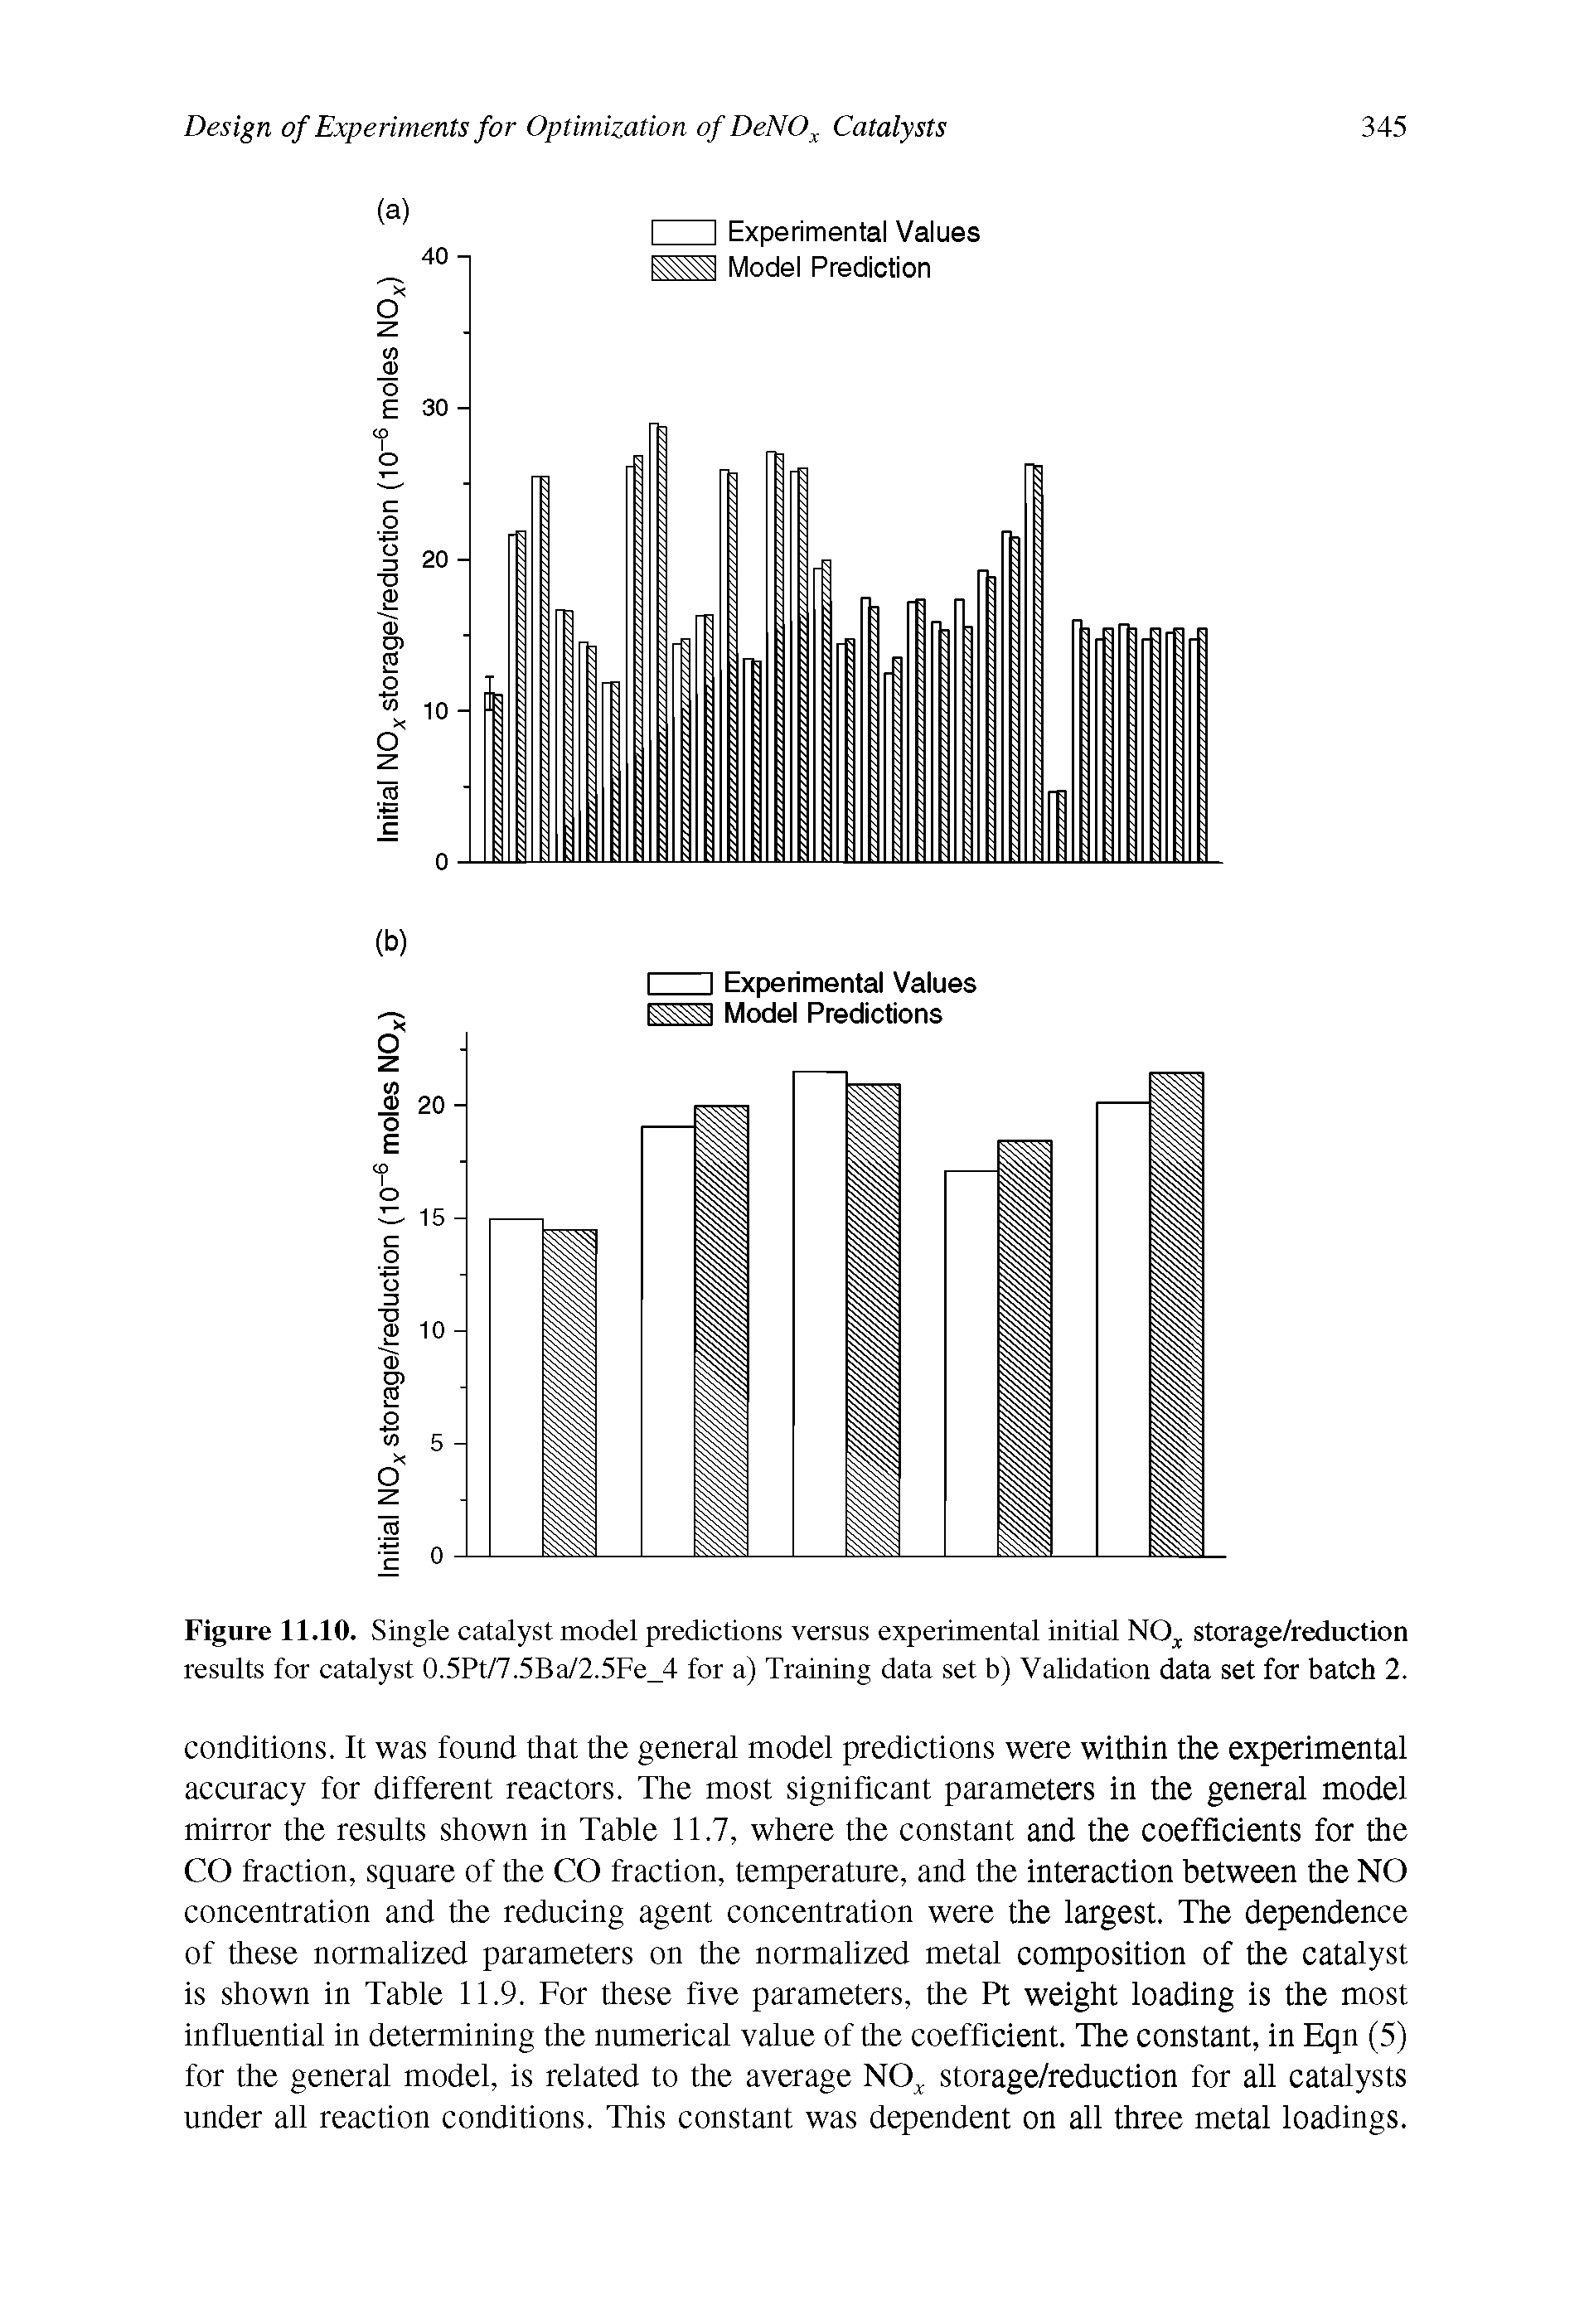 Figure 11.10. Single catalyst model predictions versus experimental initial NO storage/reduction results for catalyst 0.5Pt/7.5Ba/2.5Fe 4 for a) Training data set b) Validation data set for batch 2.